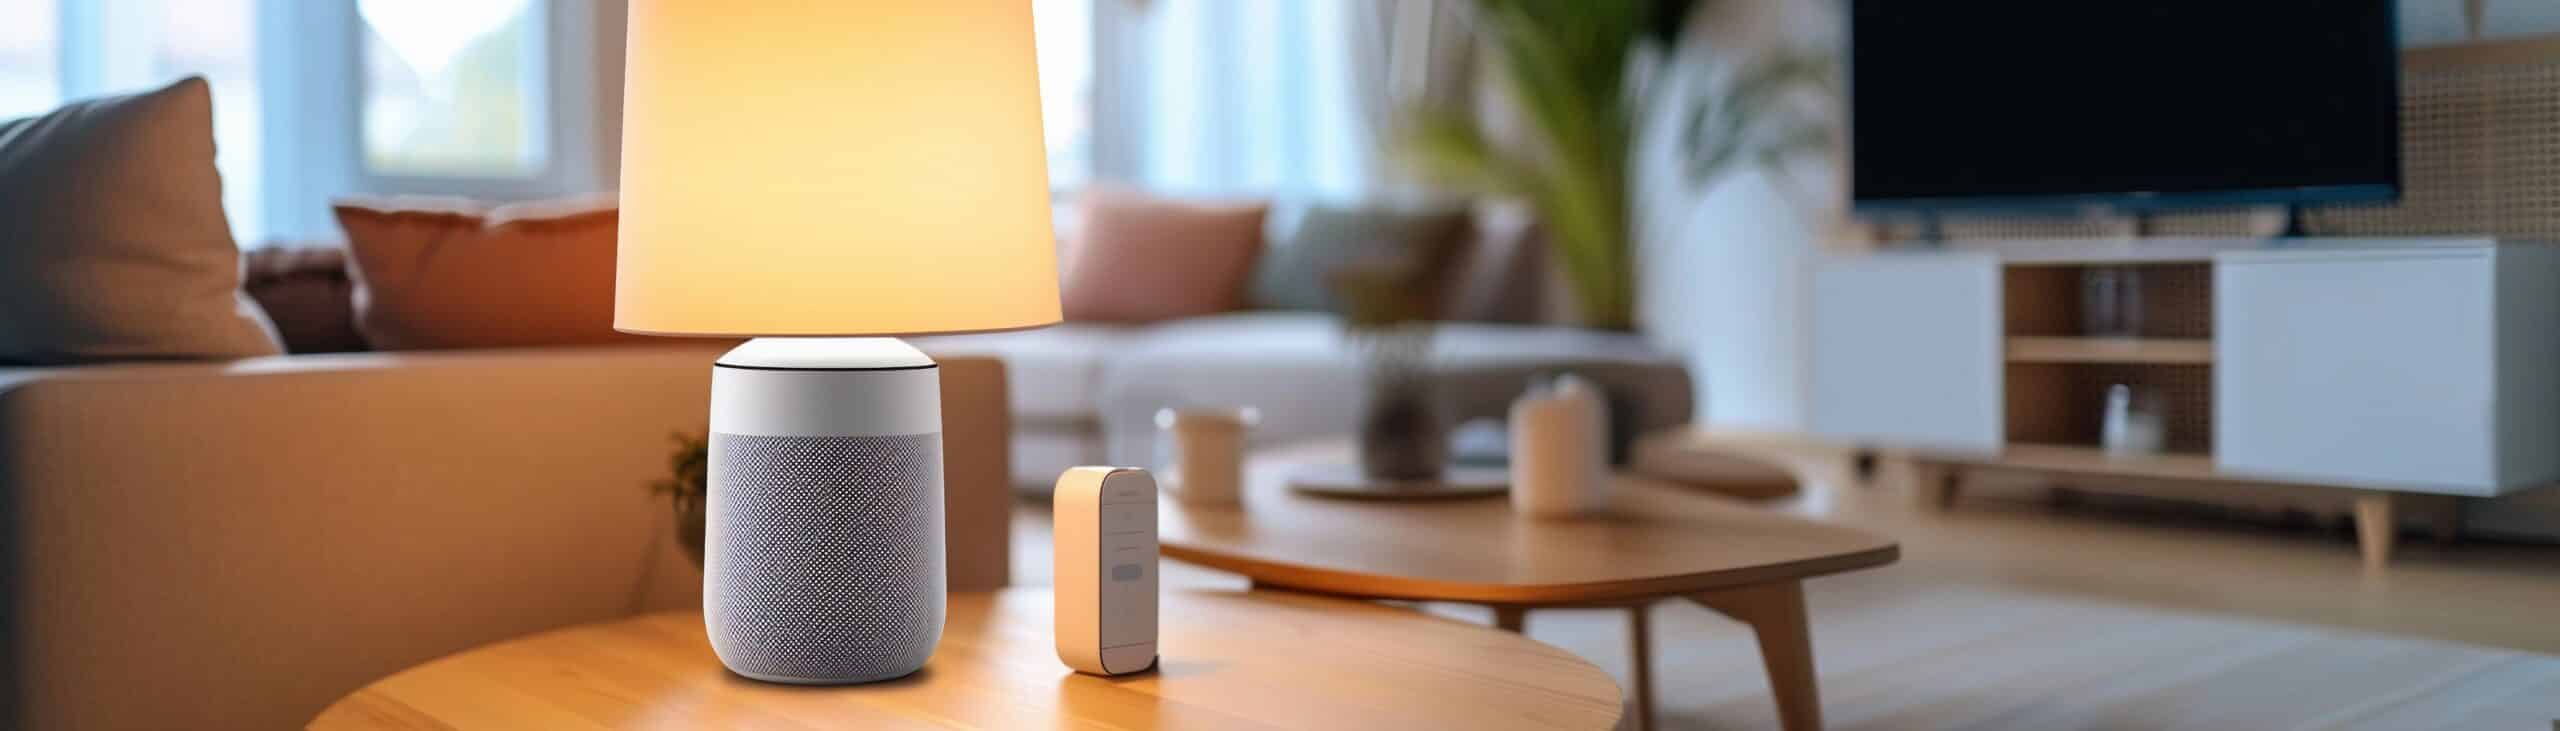 www.appr.com : Can 1 Smart Plug Connect To Alexa And Google Home?